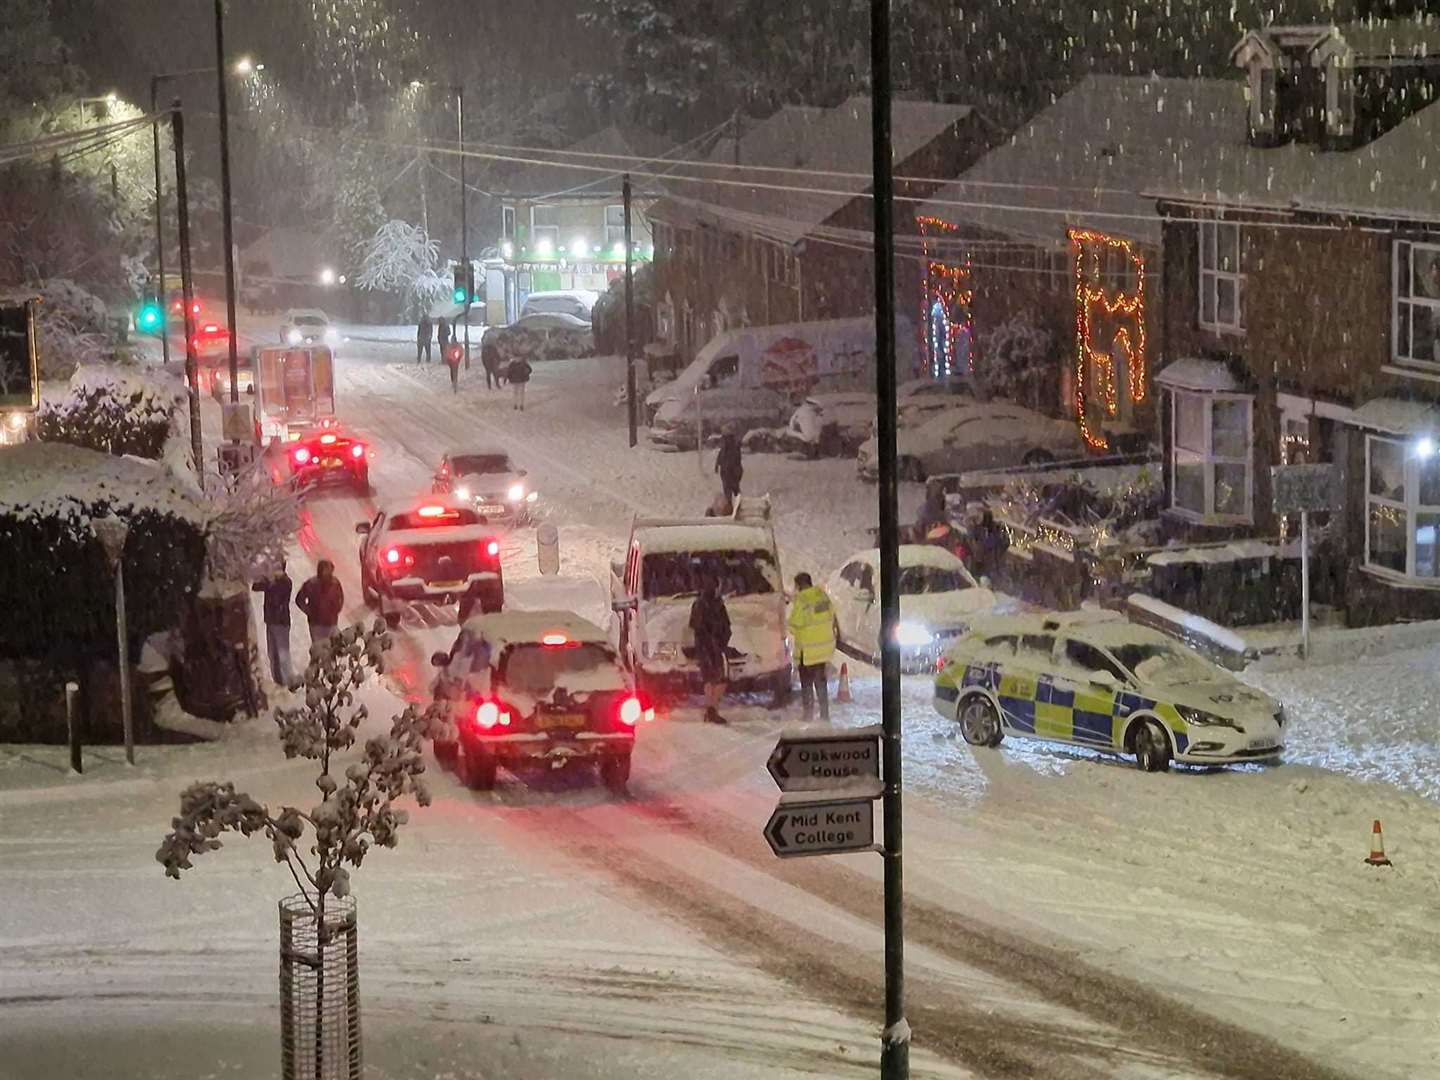 The snow caused issues on Tonbridge Road, Maidstone, in December 2022. Picture: Dan Farry